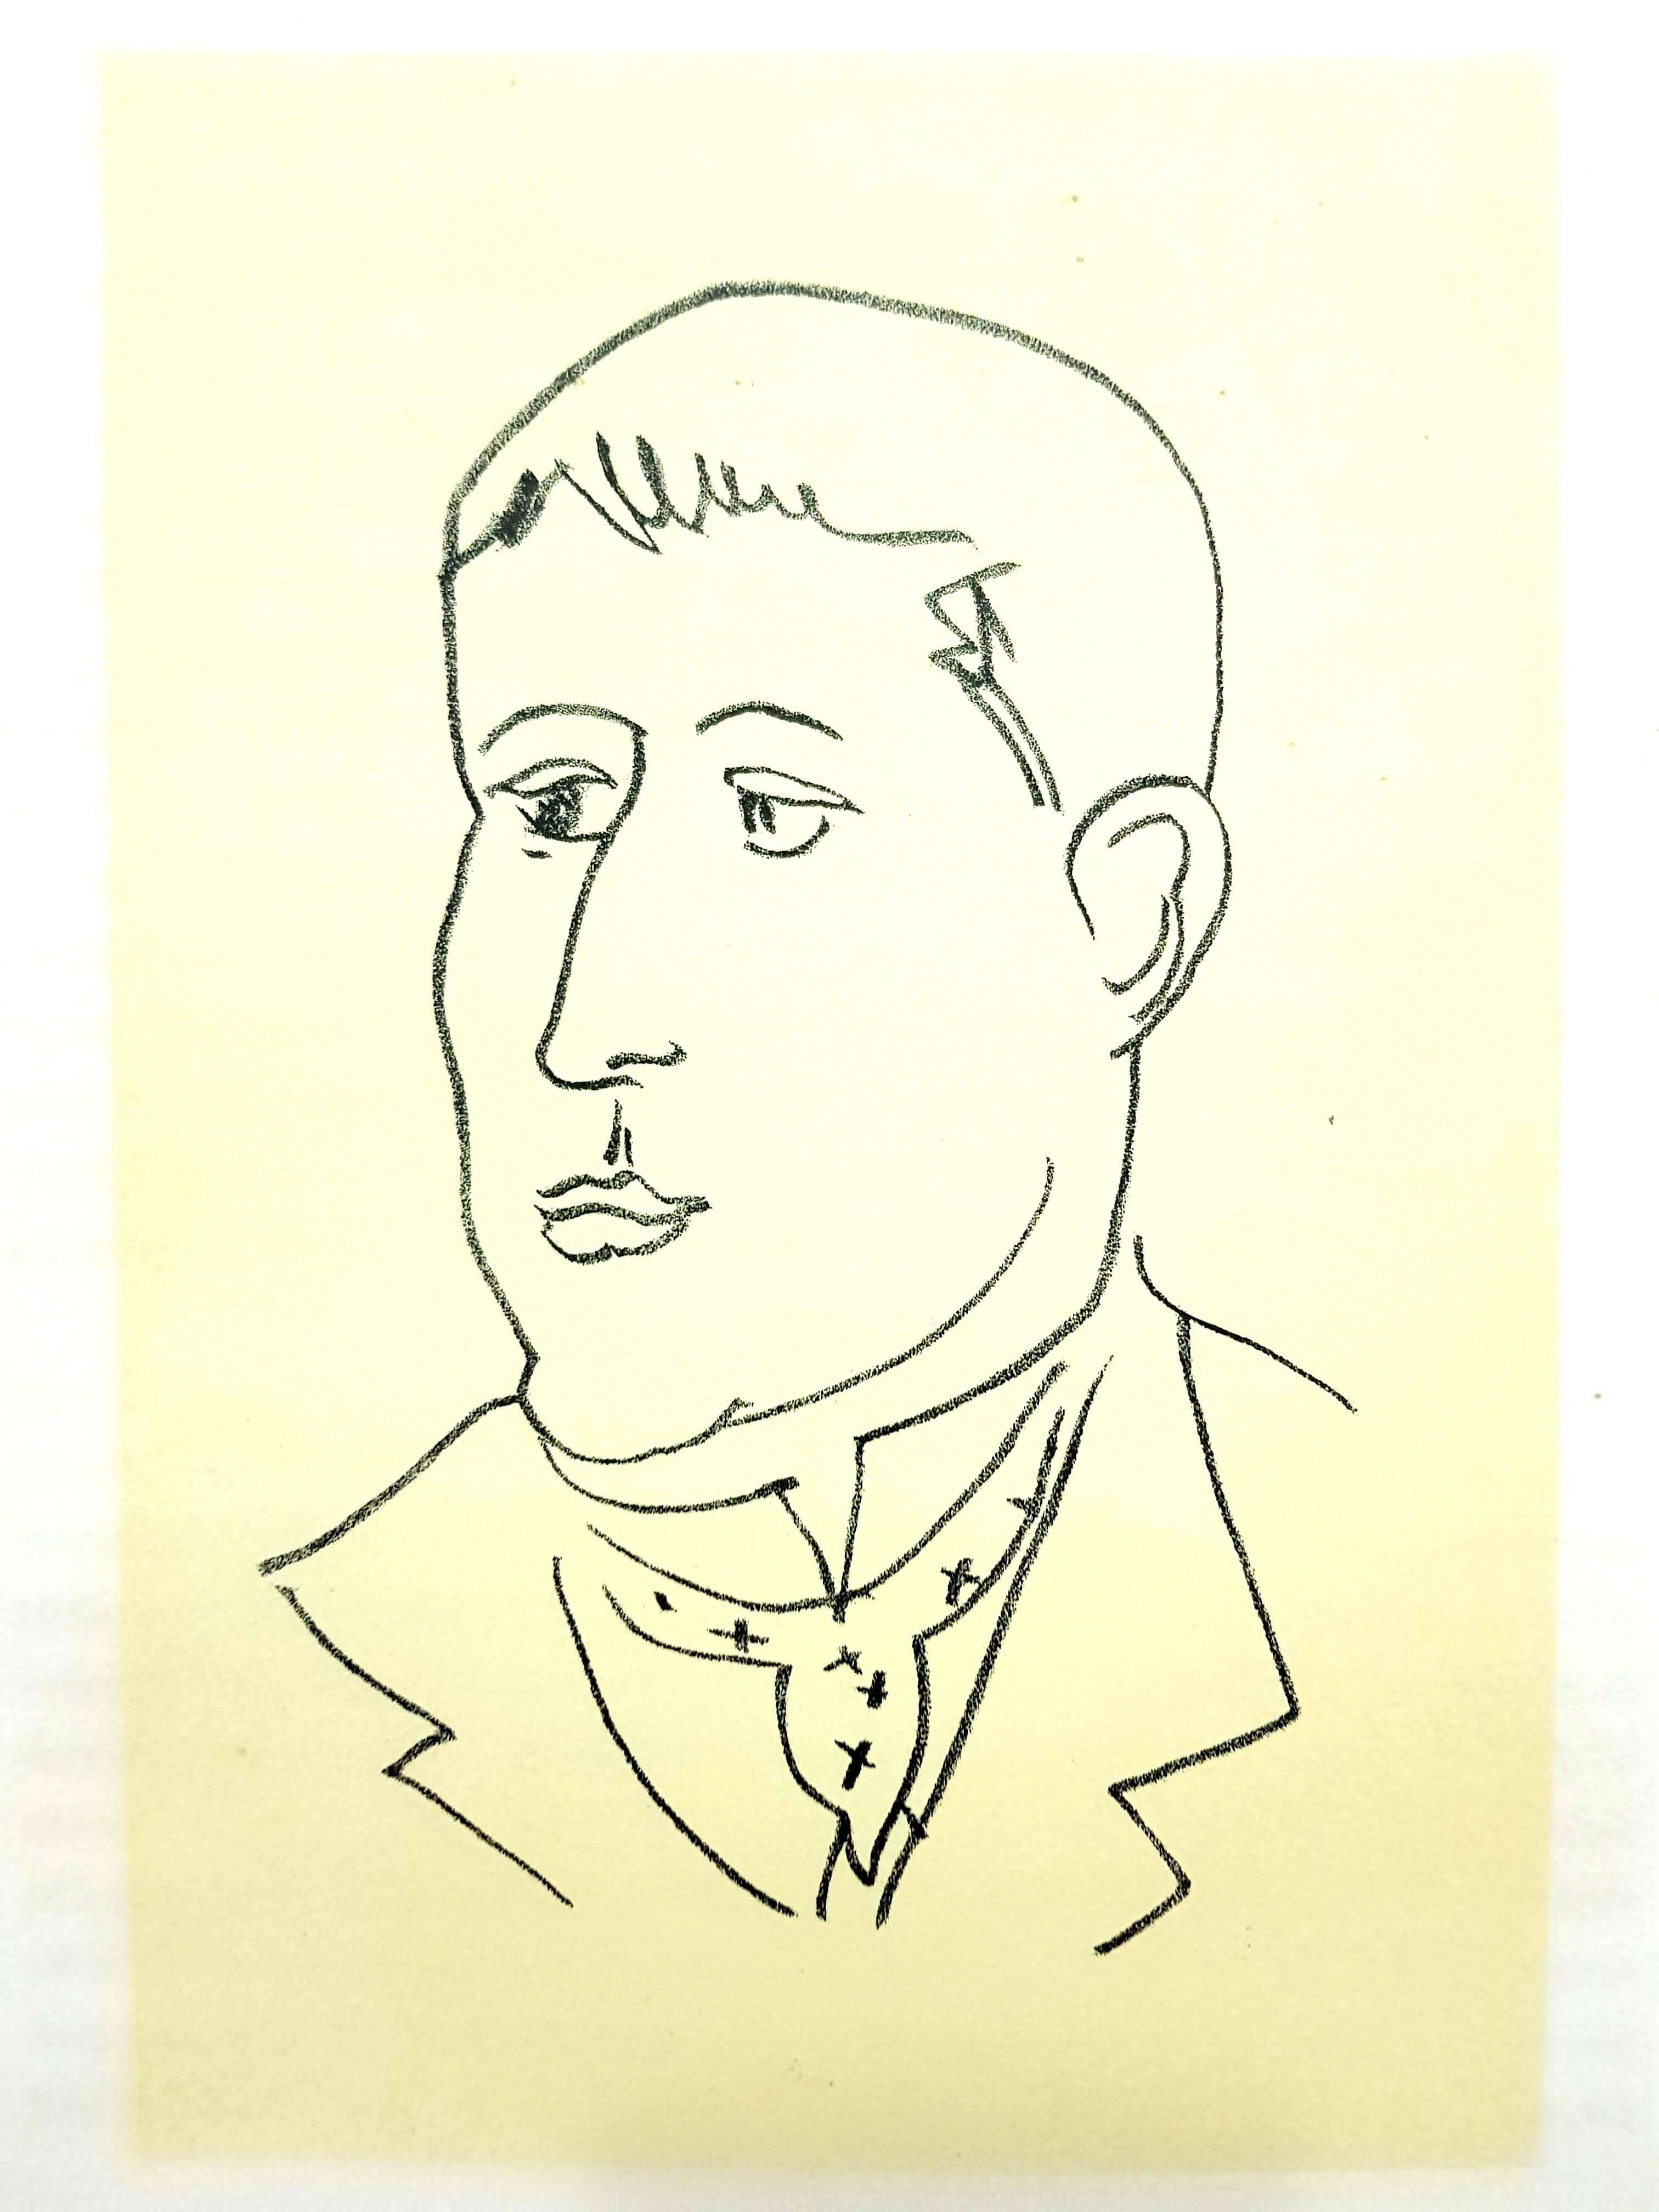 Original Lithograph - Henri Matisse - Apollinaire
Artist : Henri MATISSE
13 x 10 inches
Edition: 151/330
References : Duthuit-Matisse Catalogue raisonné 31
Unsigned and unumbered as issued